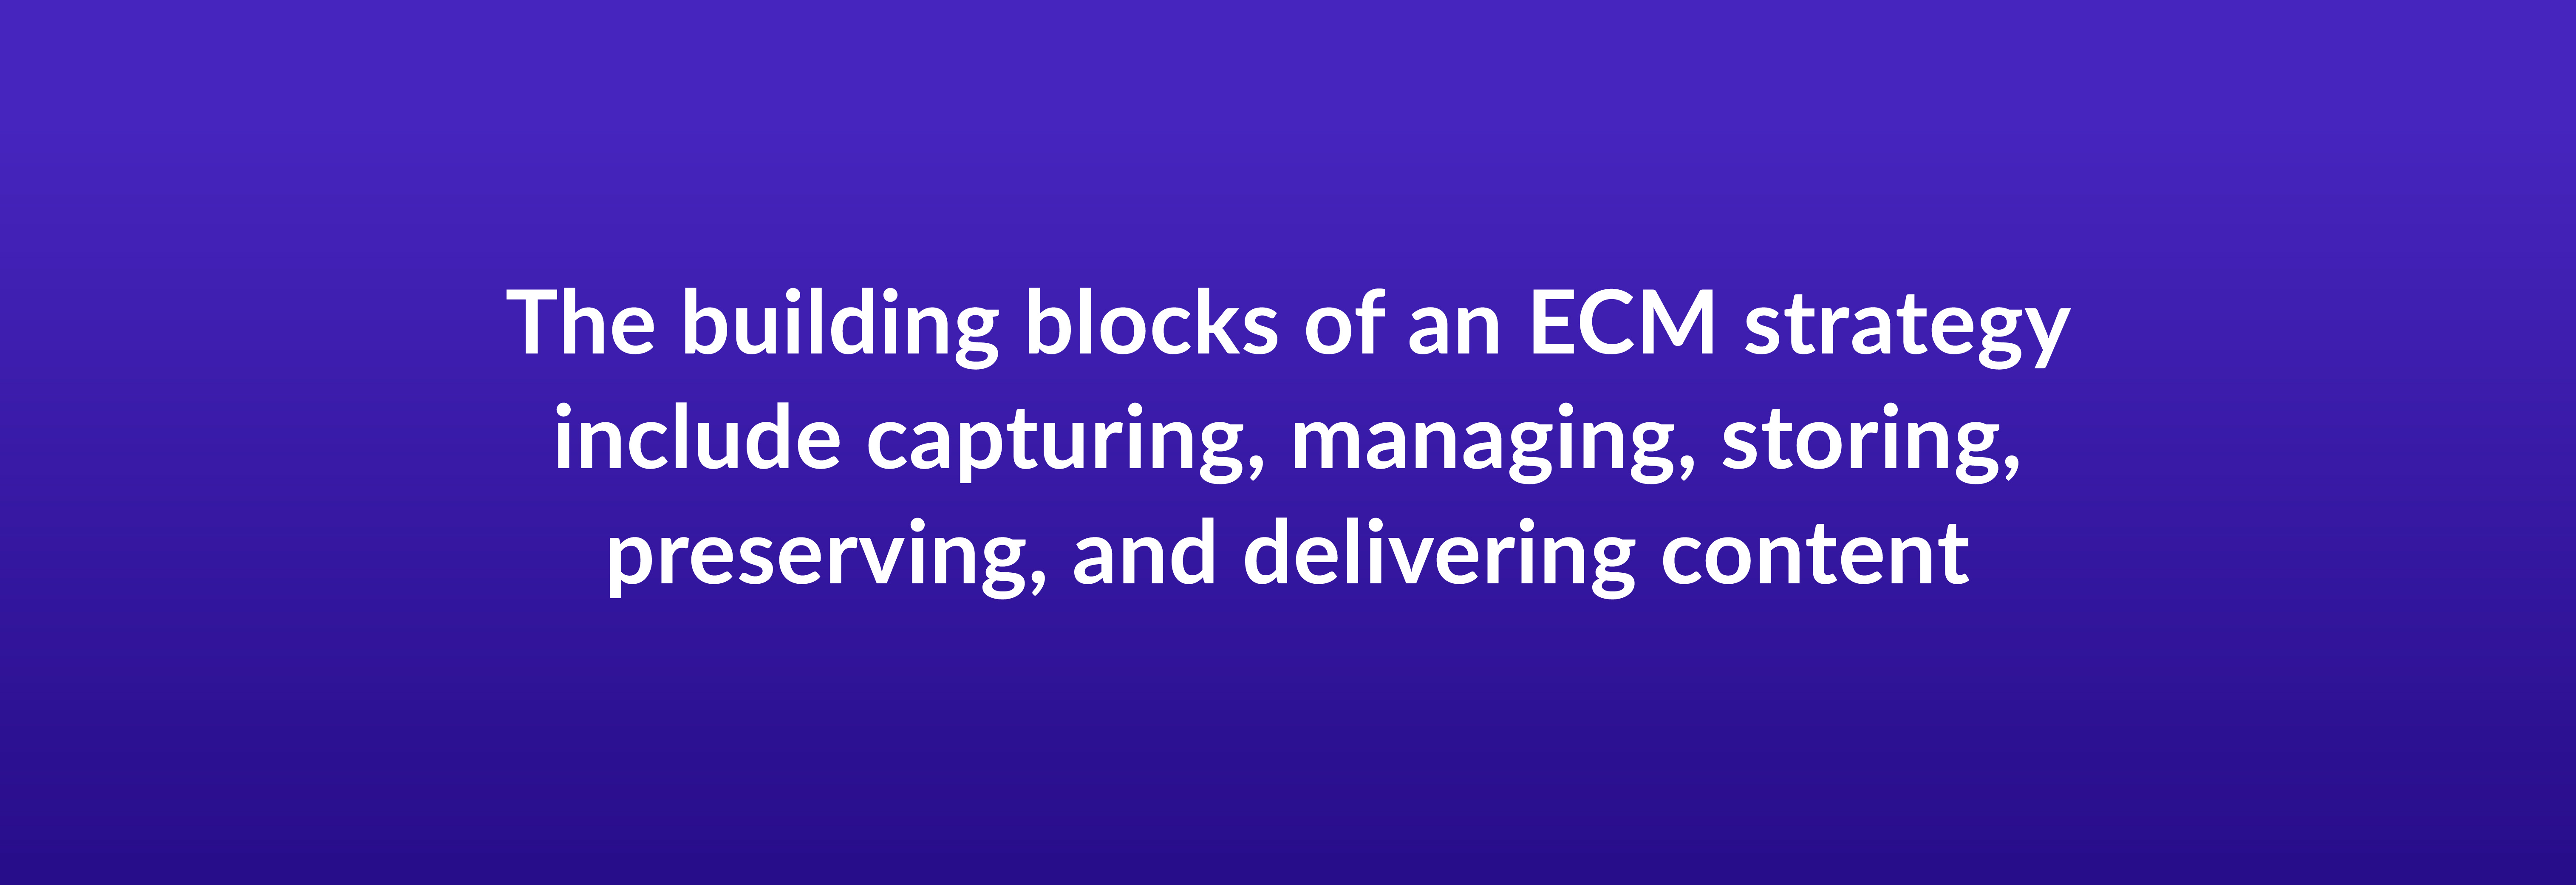 The building blocks of an ECM strategy include capturing, managing, storing, preserving, and delivering content